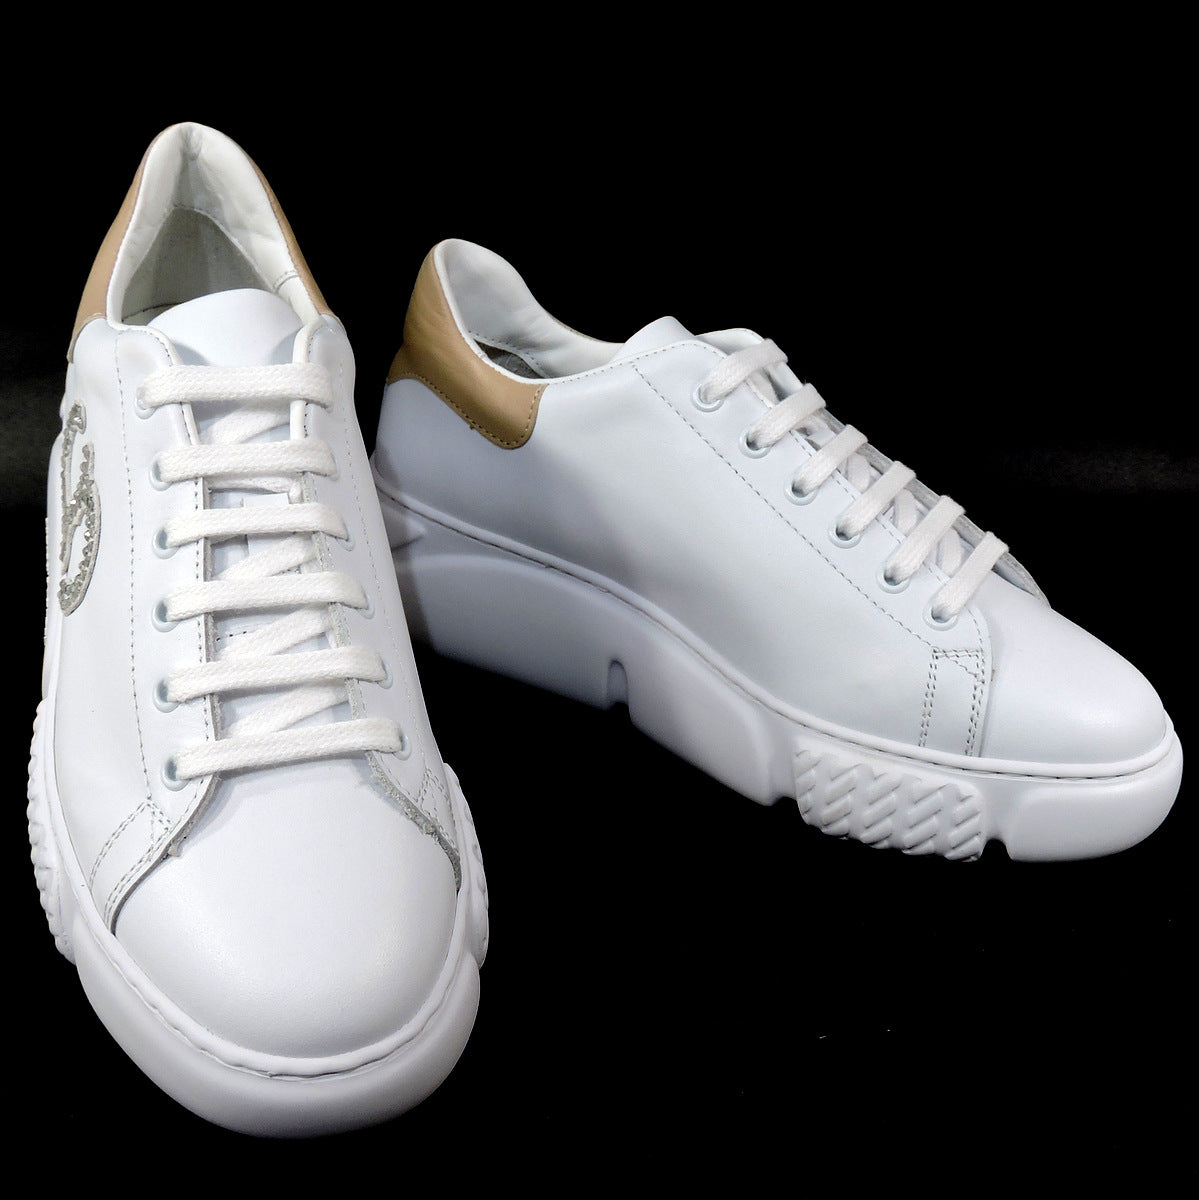 CASADEI 🇮🇹 WOMEN'S WHITE SOFT LEATHER COMFORT FASHION SNEAKERS